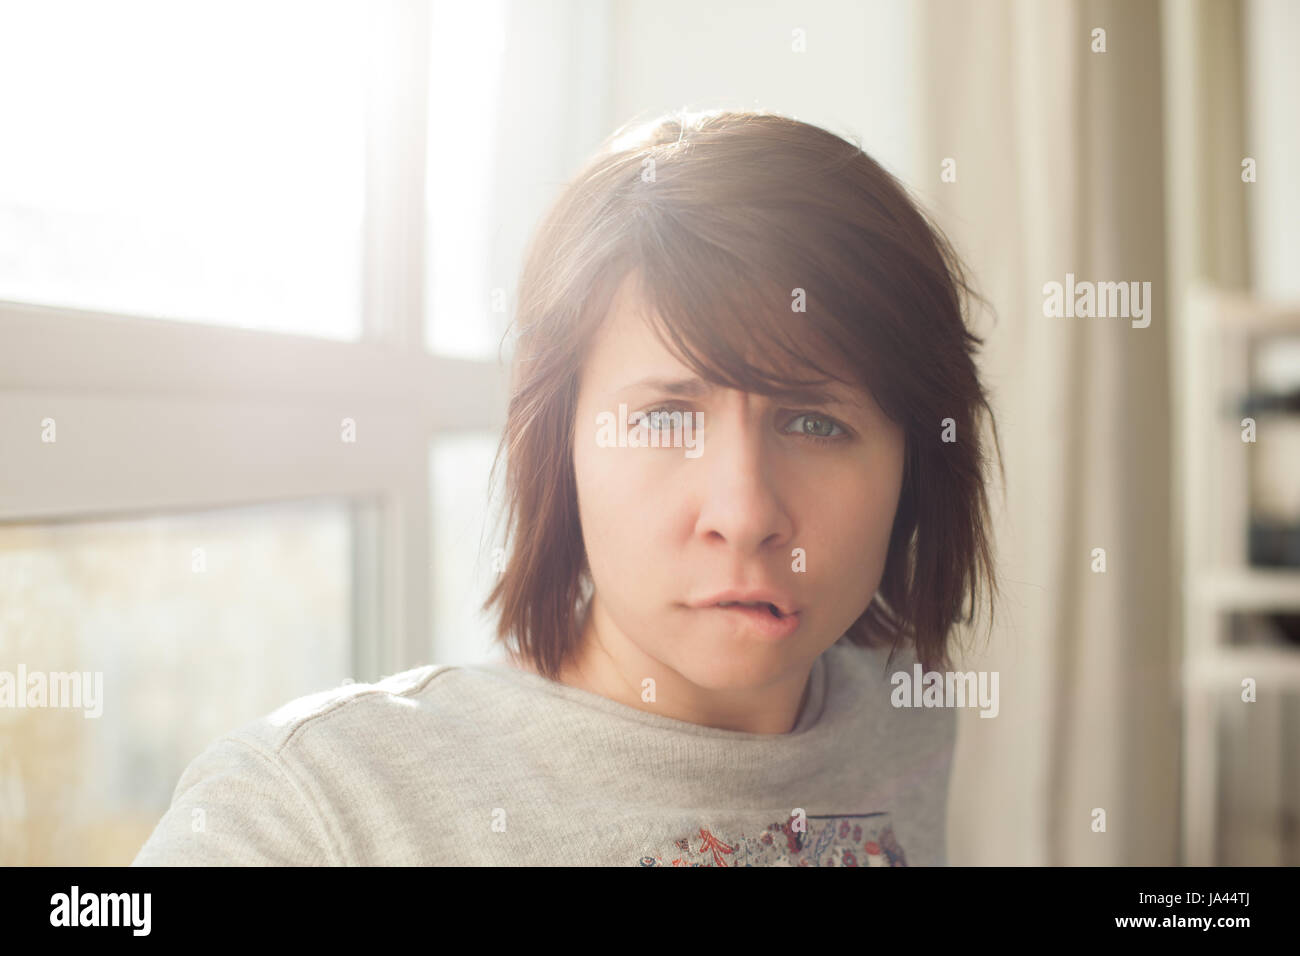 Caucasian woman in turmoil biting lips and frowns Stock Photo